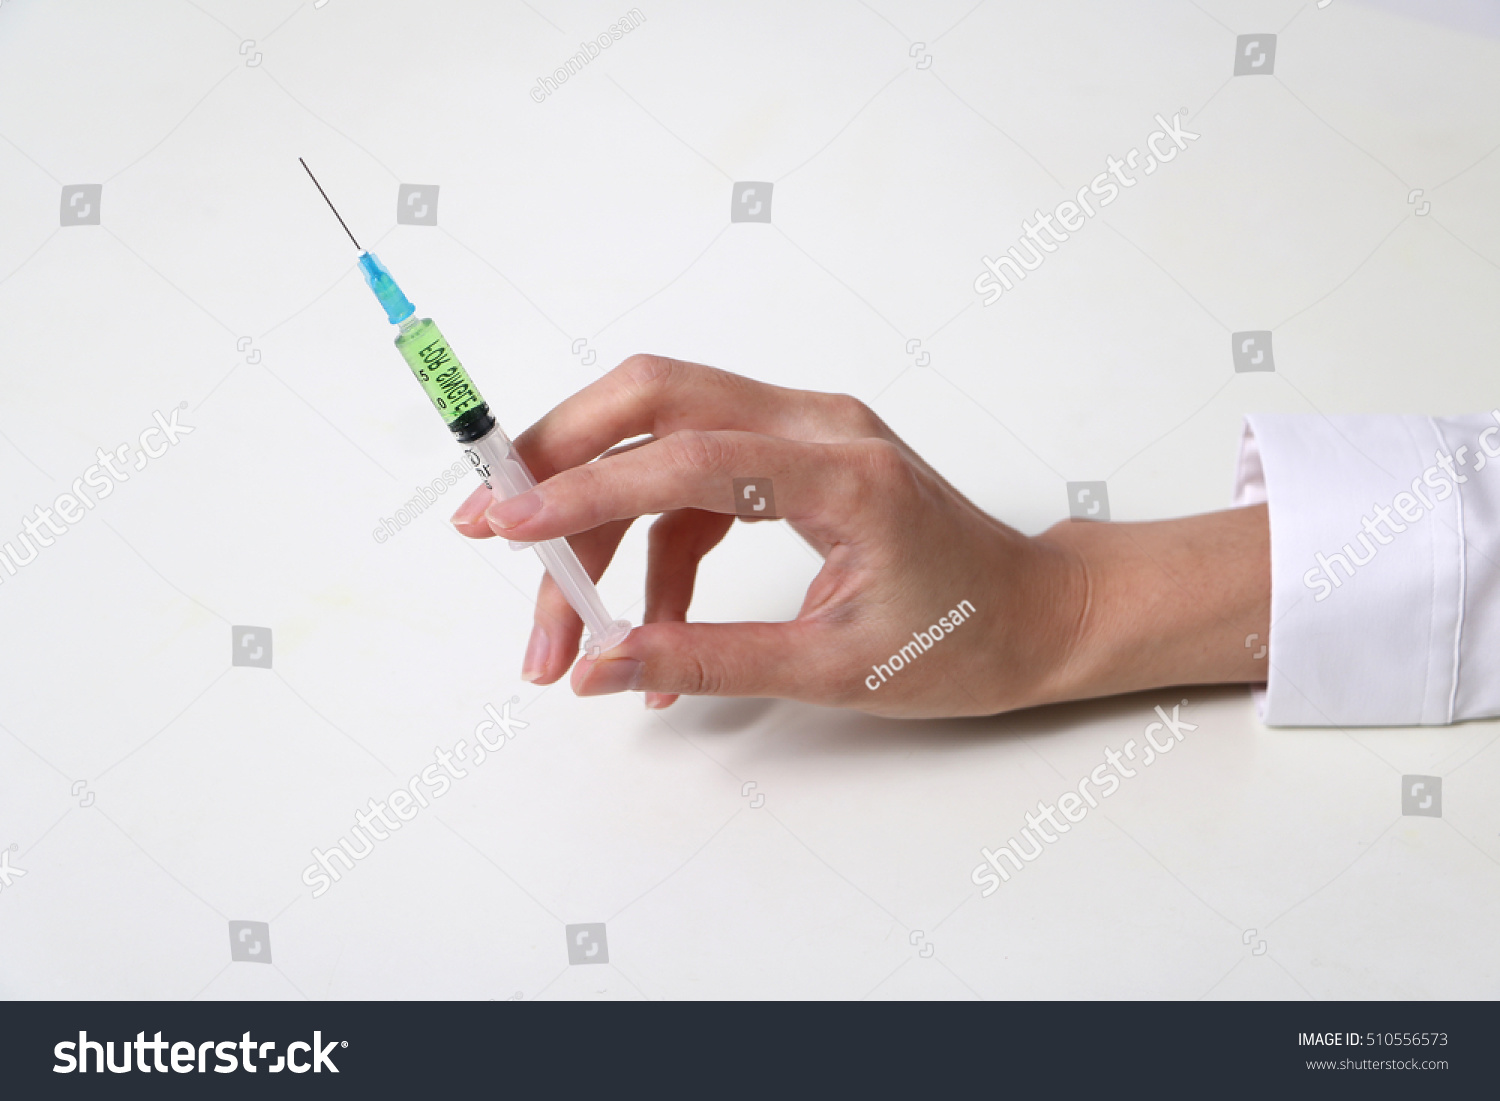 injector held by woman hand #510556573